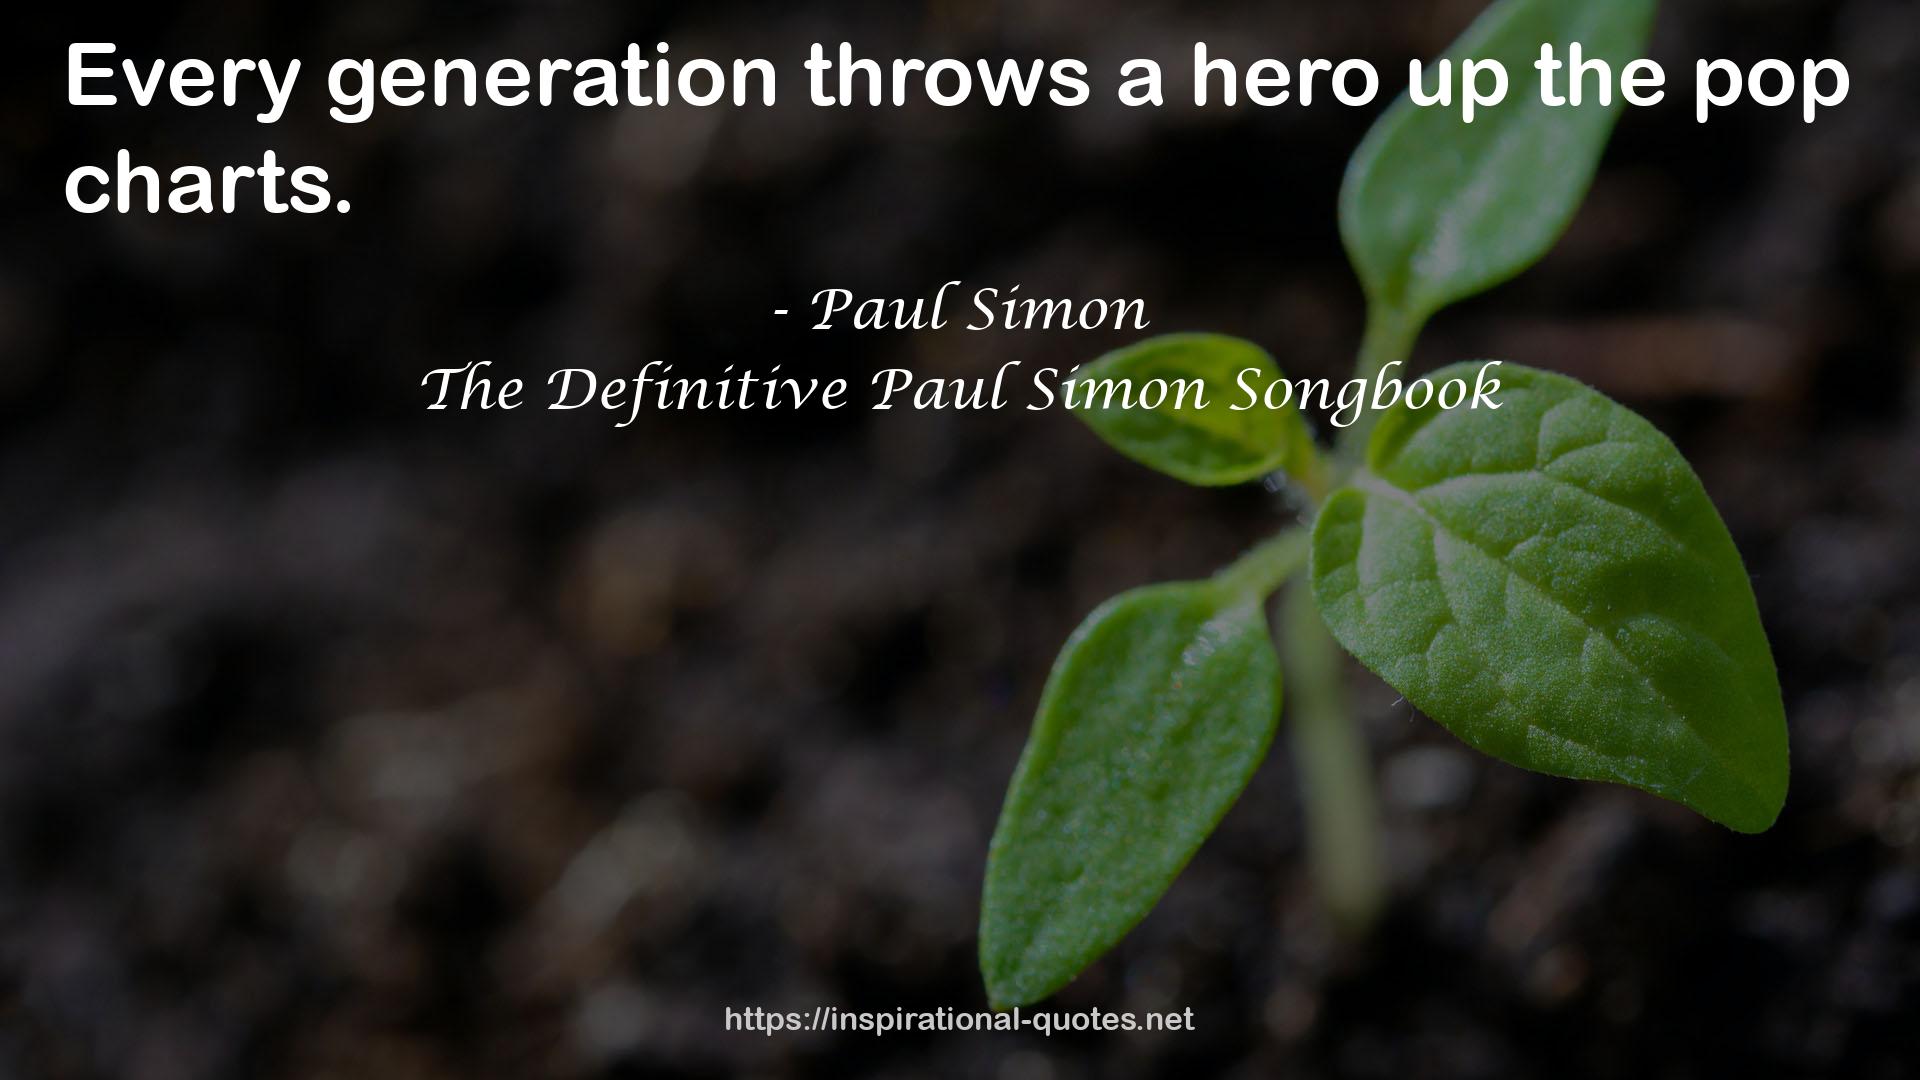 The Definitive Paul Simon Songbook QUOTES